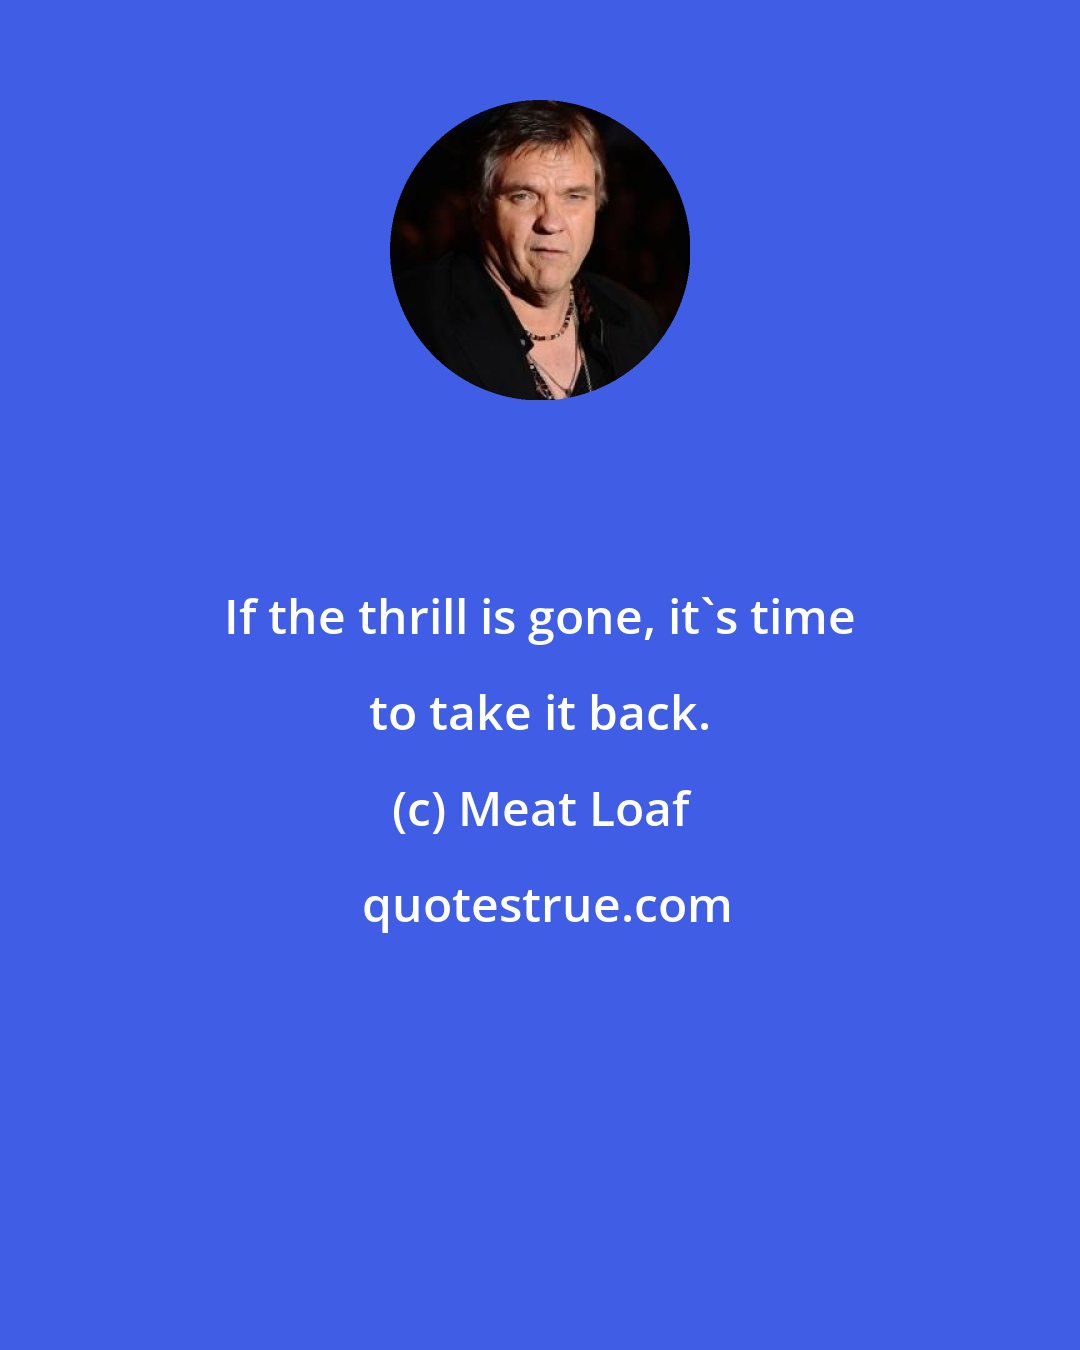 Meat Loaf: If the thrill is gone, it's time to take it back.